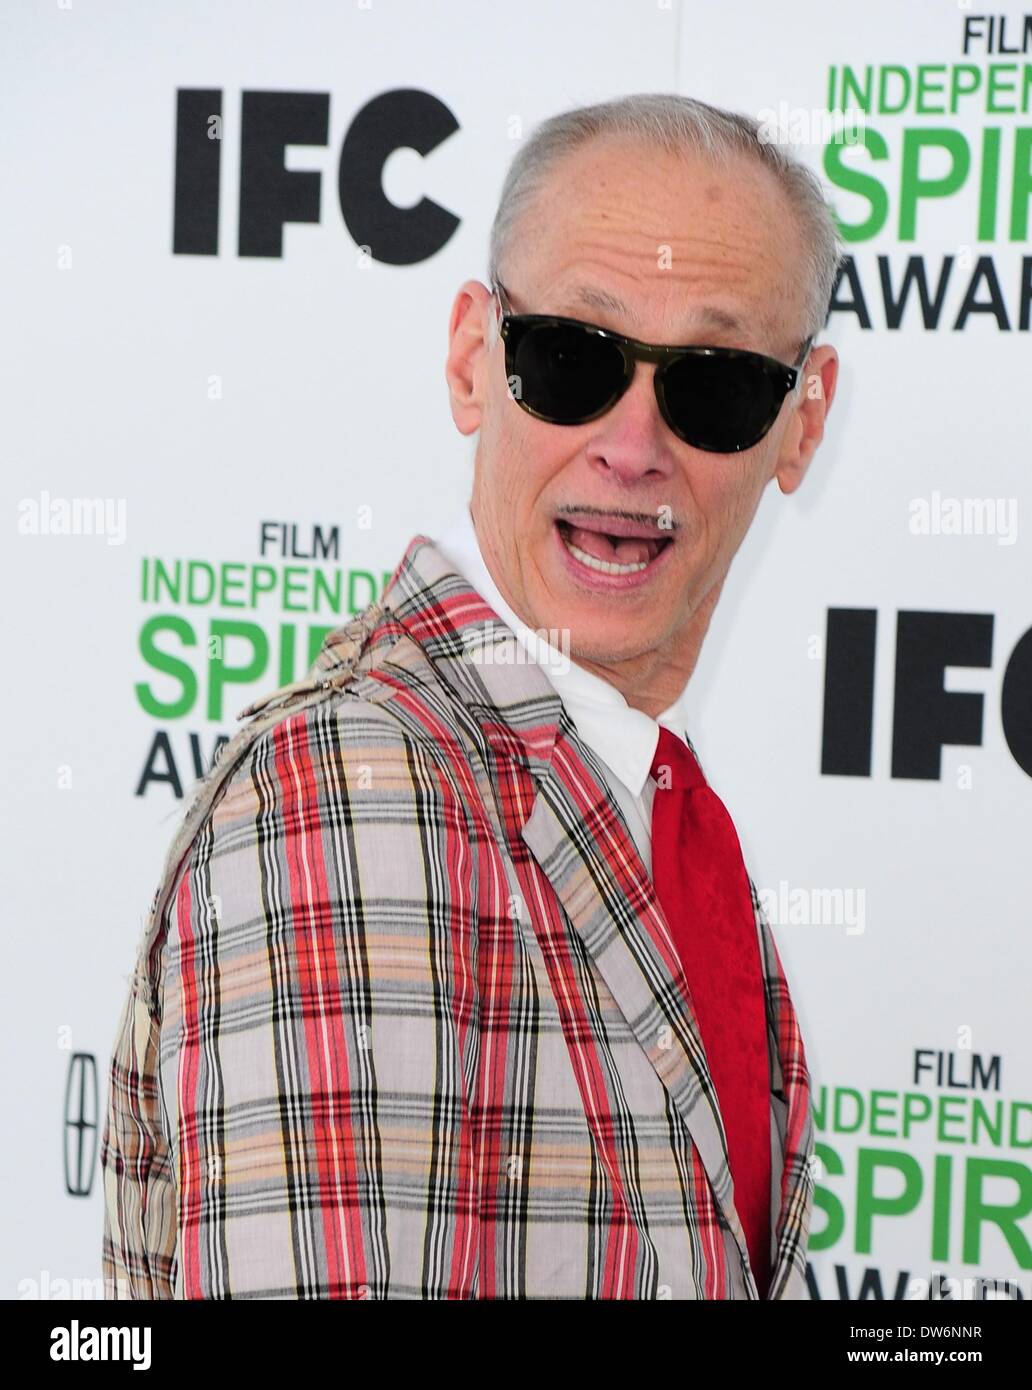 Santa Monica, CA, USA. 1st March, 2014. John Waters at arrivals for 2014 Film Independent Spirit Awards - Arrivals, Santa Monica Beach, Santa Monica, CA March 1, 2014. Photo By: Gregorio Binuya/Everett Collection/Alamy Live News Stock Photo